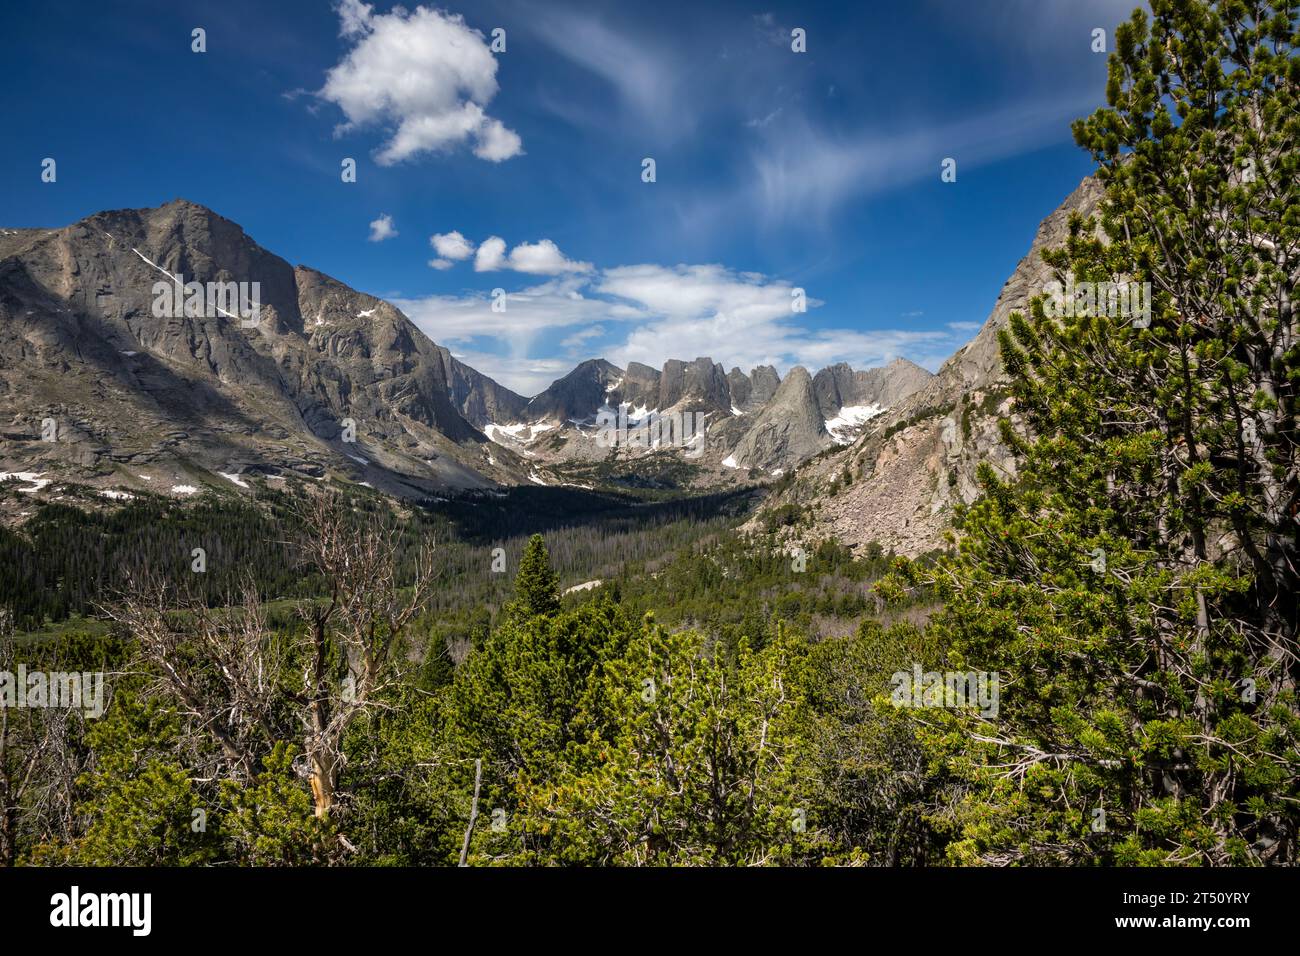 WY05575-00...WYOMING - Cirque of the Towers viewed from the Lizard Head Trail in the Popo Agie Wilderness area of the Wind River Range. Stock Photo